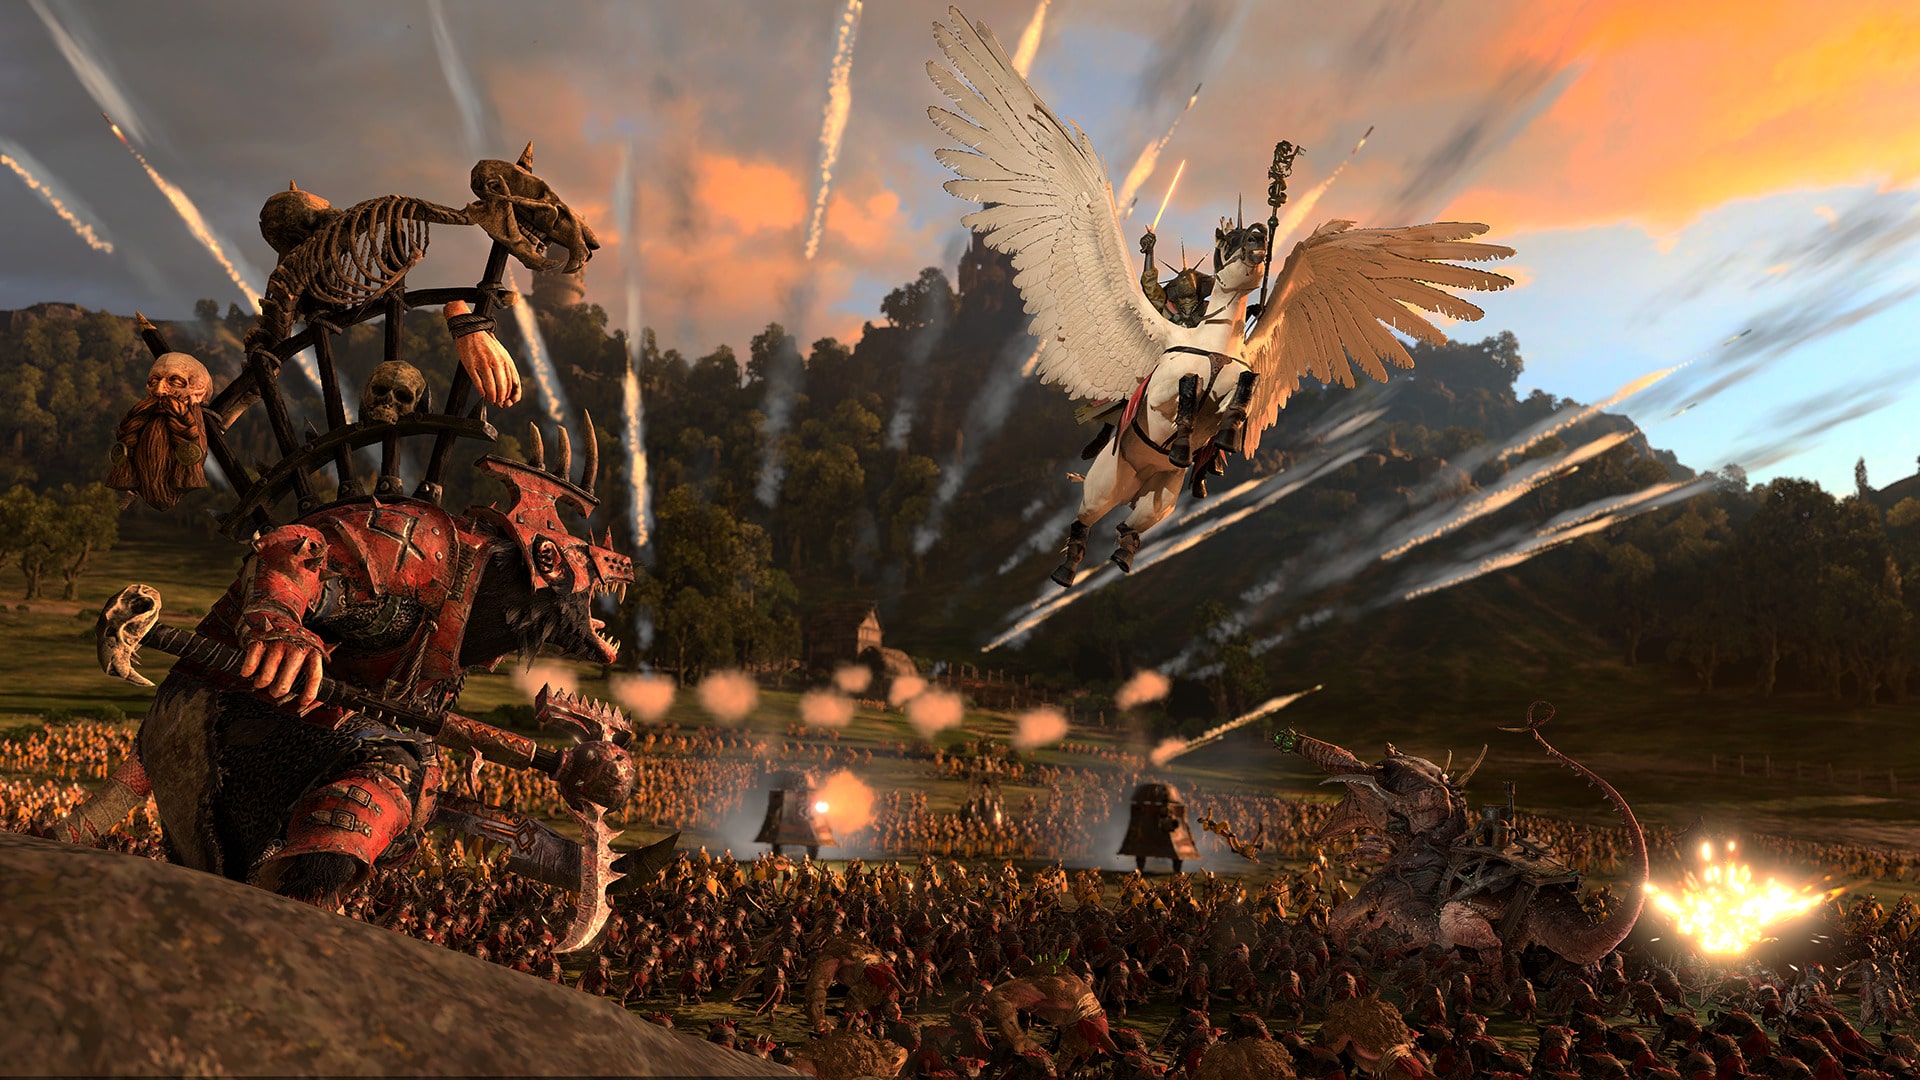 A winged pegasus flying over the battlefield in Total War: Warhammer 3